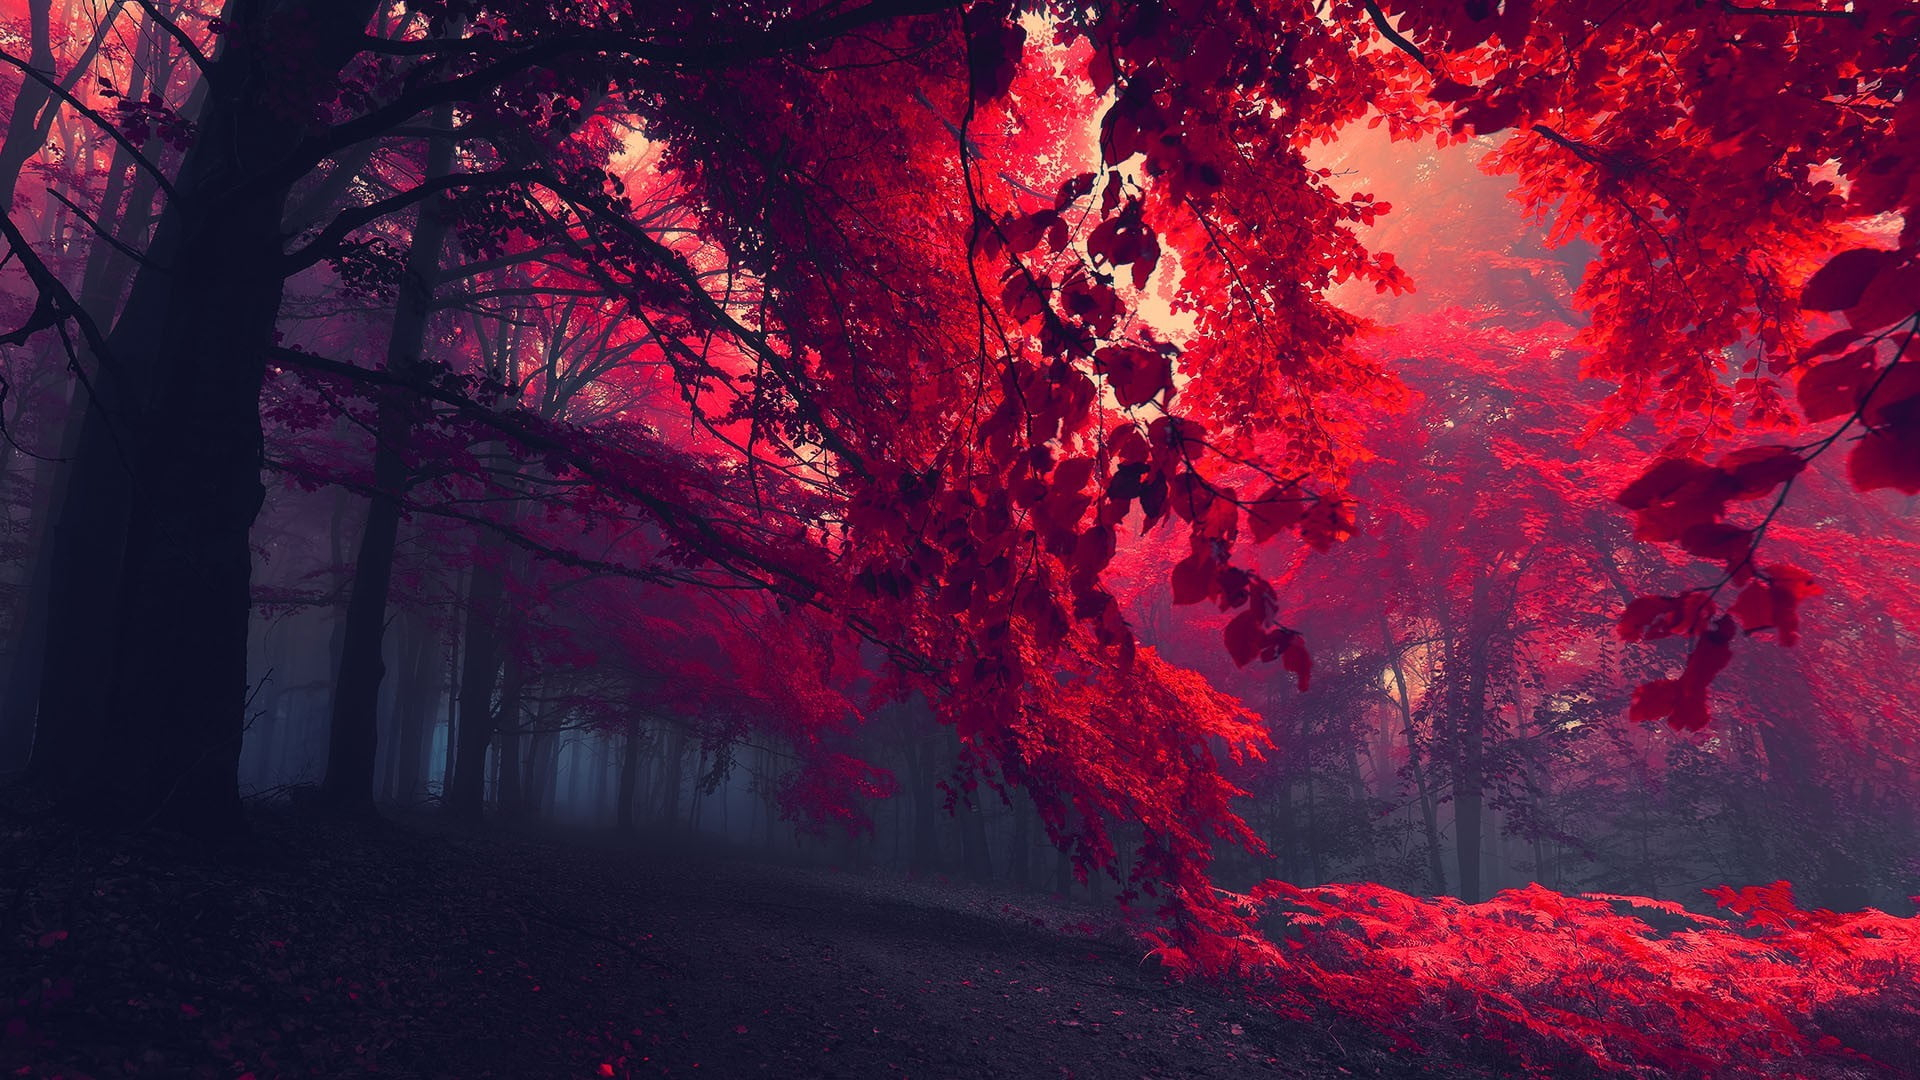 Black and red trees, sun rays through red trees, dark, nature